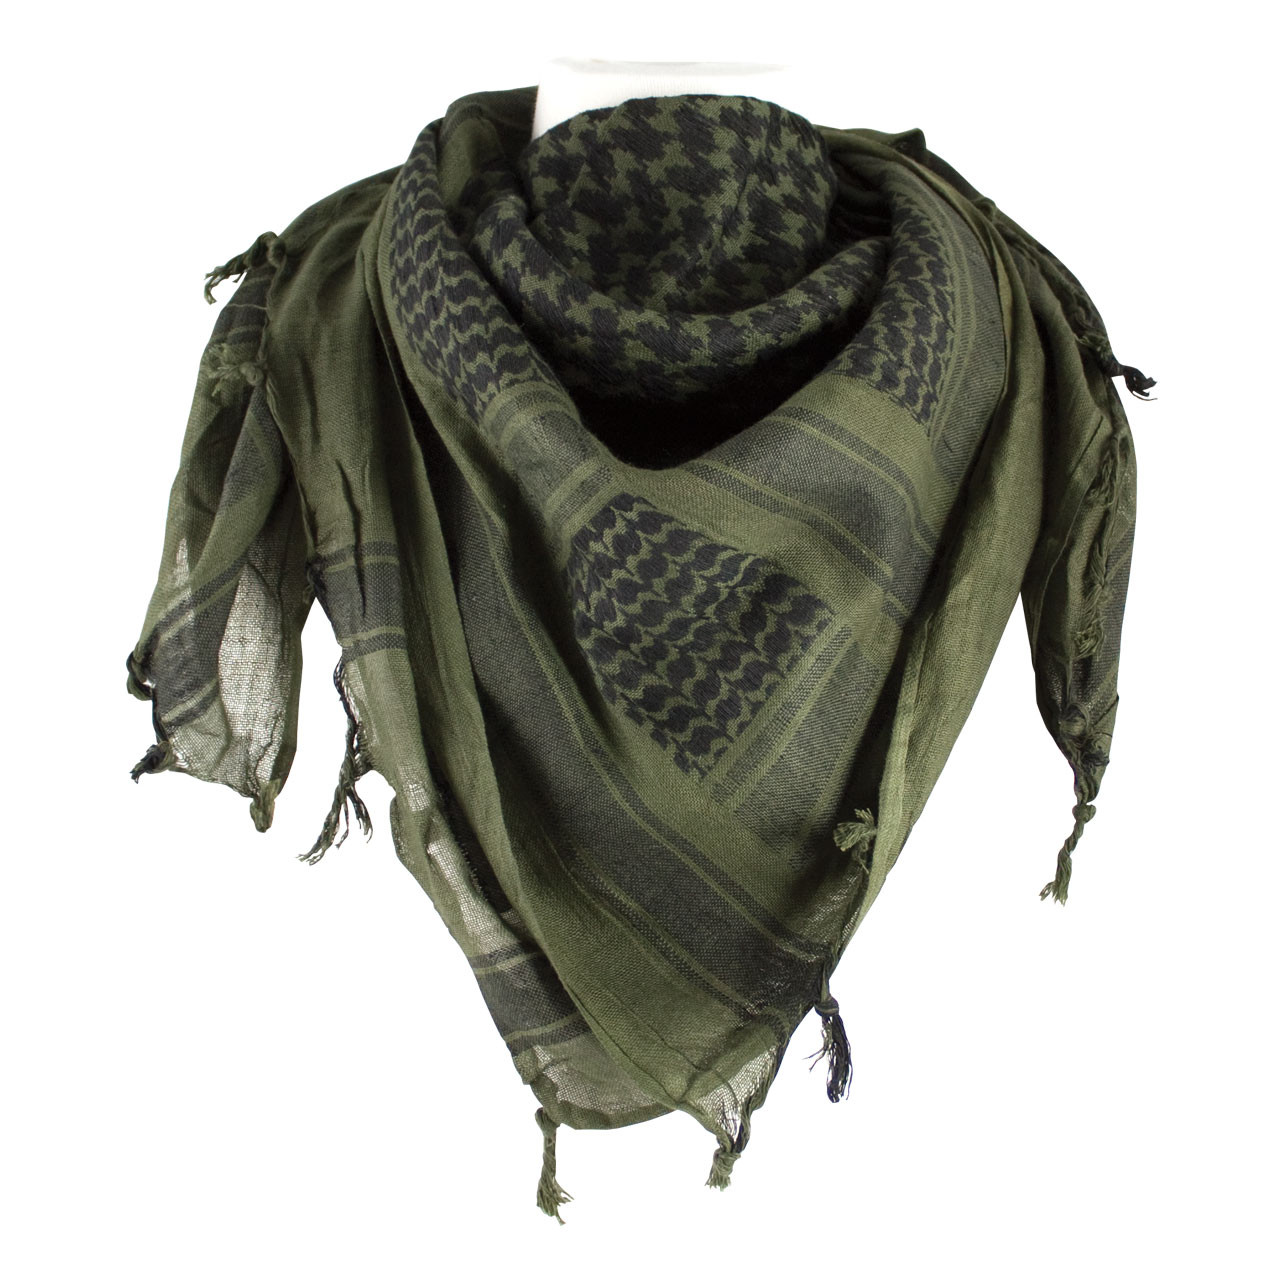 Shemagh Head Wrap - Olive Drab/Black